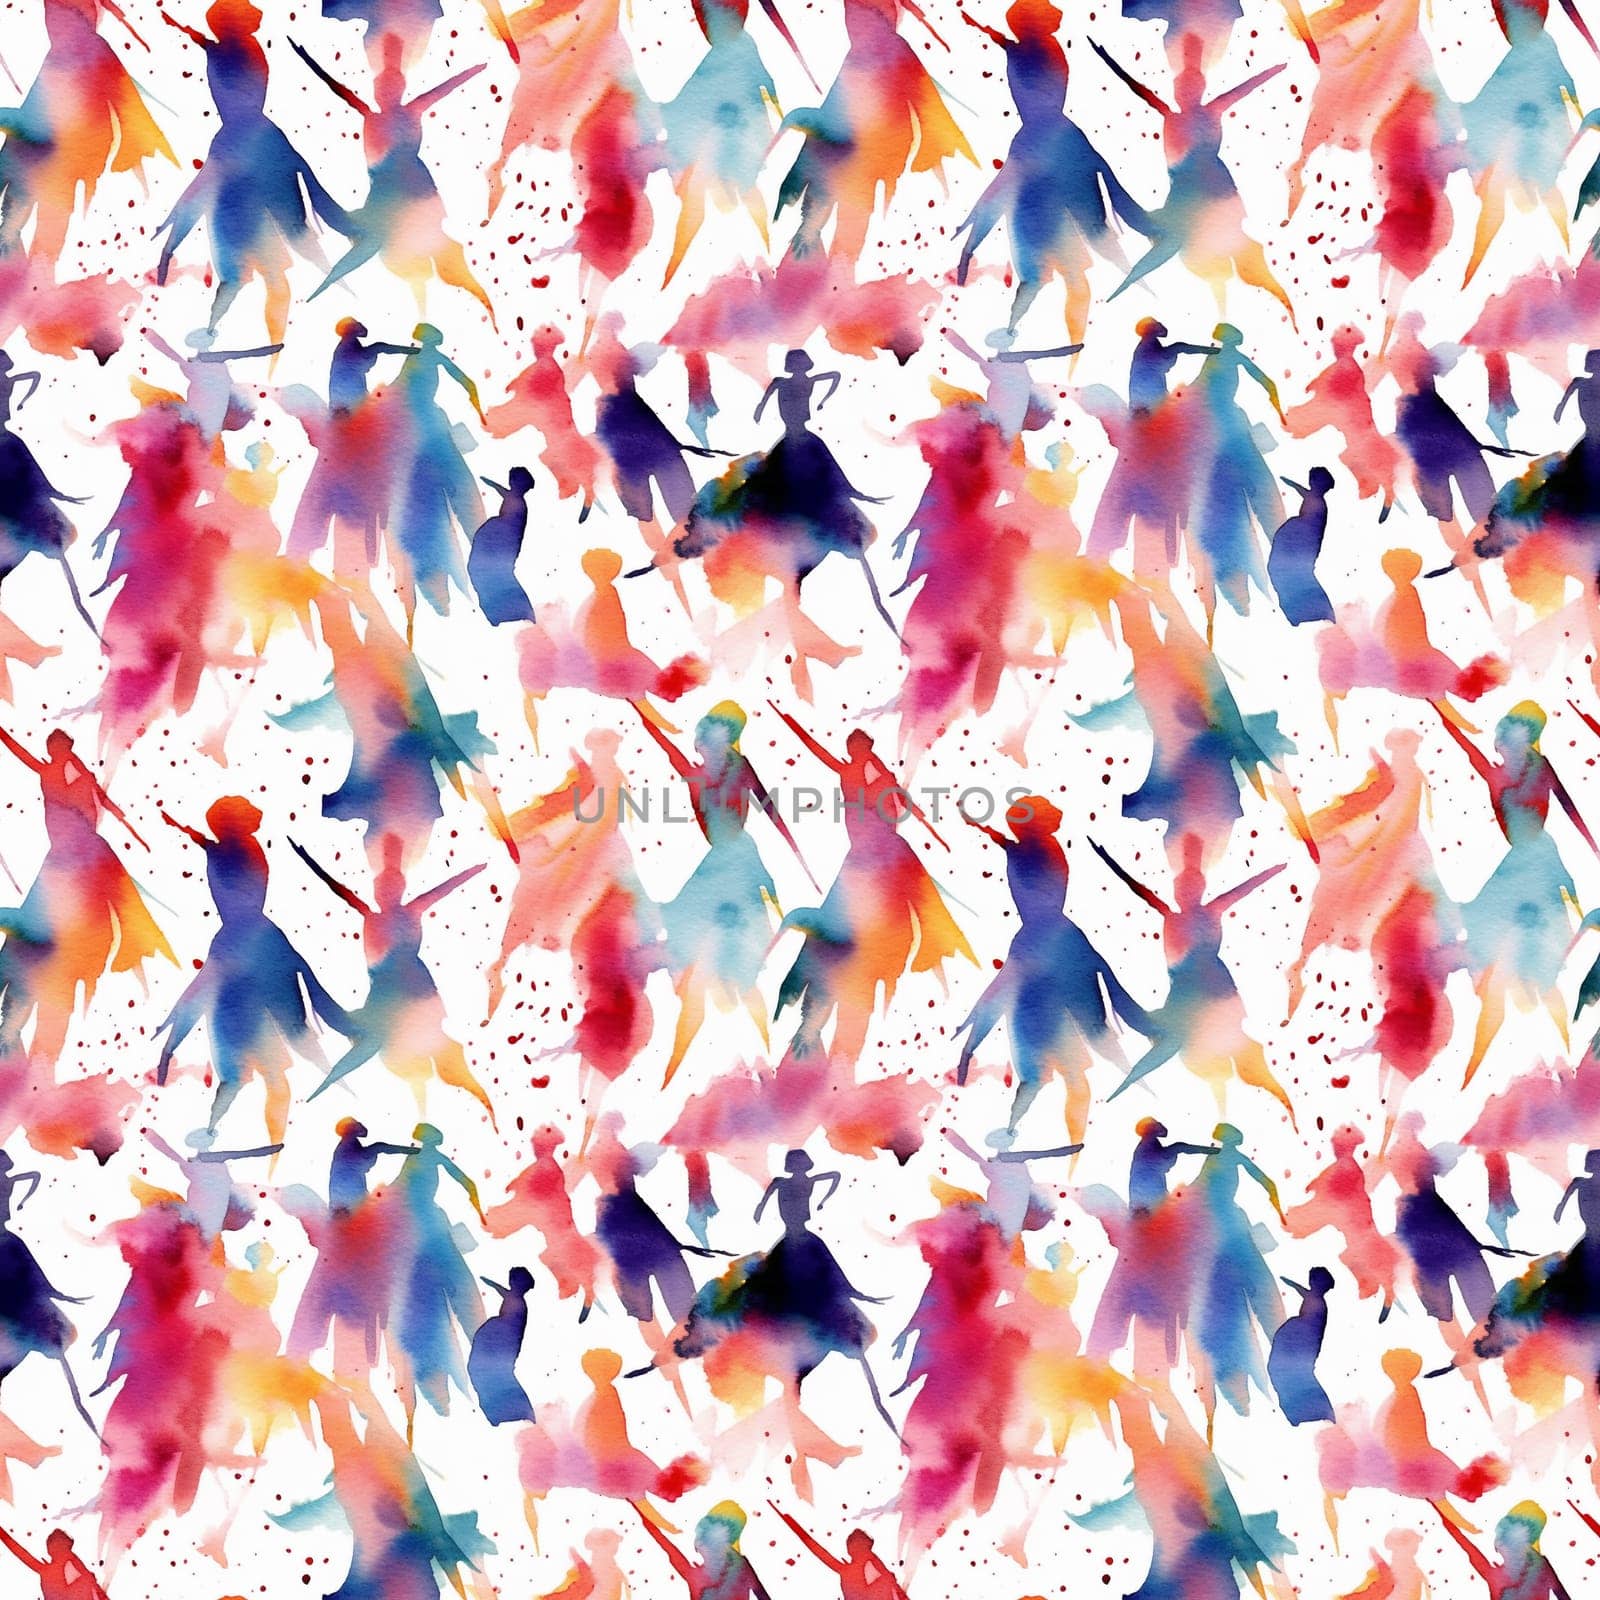 Seamless pattern: hand drawn watercolor dancing abstract people. Fashion illustration with streaks and splashes of paint. AI